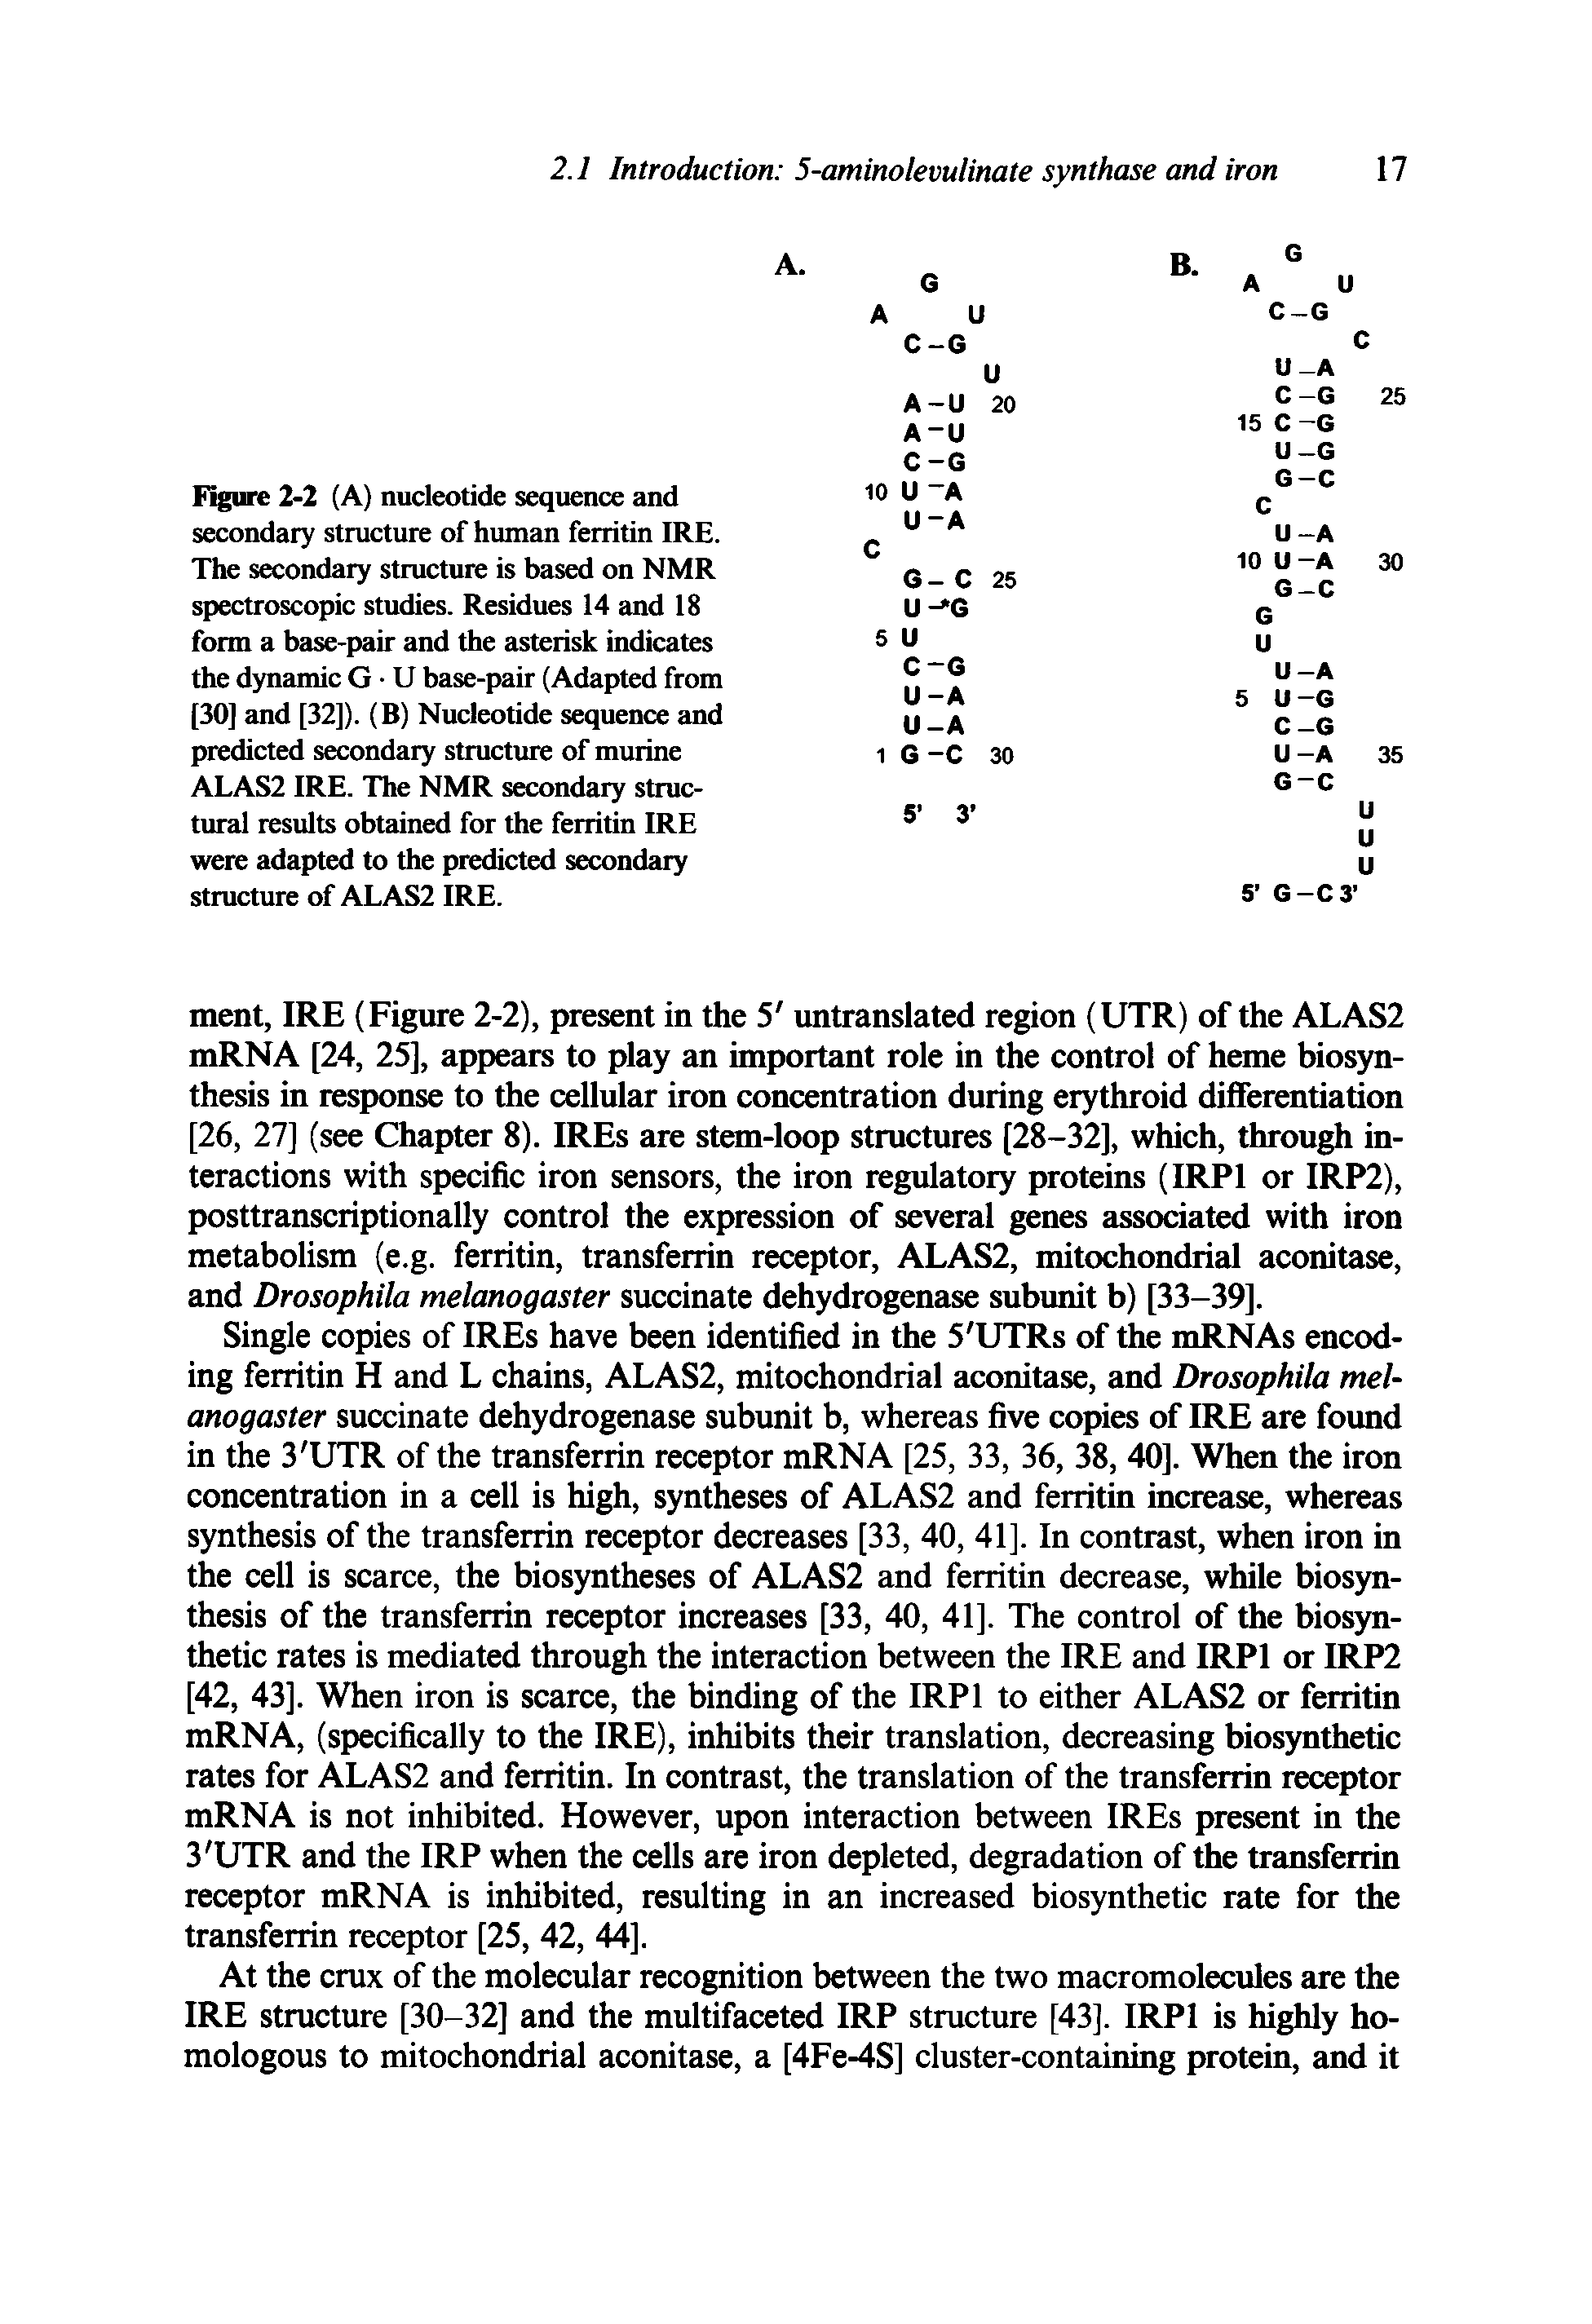 Figure 2-2 (A) nucleotide sequence and secondary structure of human ferritin IRE. The secondary structure is based on NMR spectroscopic studies. Residues 14 and 18 form a base-pair and the asterisk indicates the dynamic G U base-pair (Adapted from [30] and [32]). (B) Nucleotide sequence and predicted secondary structure of murine ALAS2 IRE. The NMR secondary structural results obtained for the ferritin IRE were adapted to the predicted secondary structure of ALAS2 IRE.